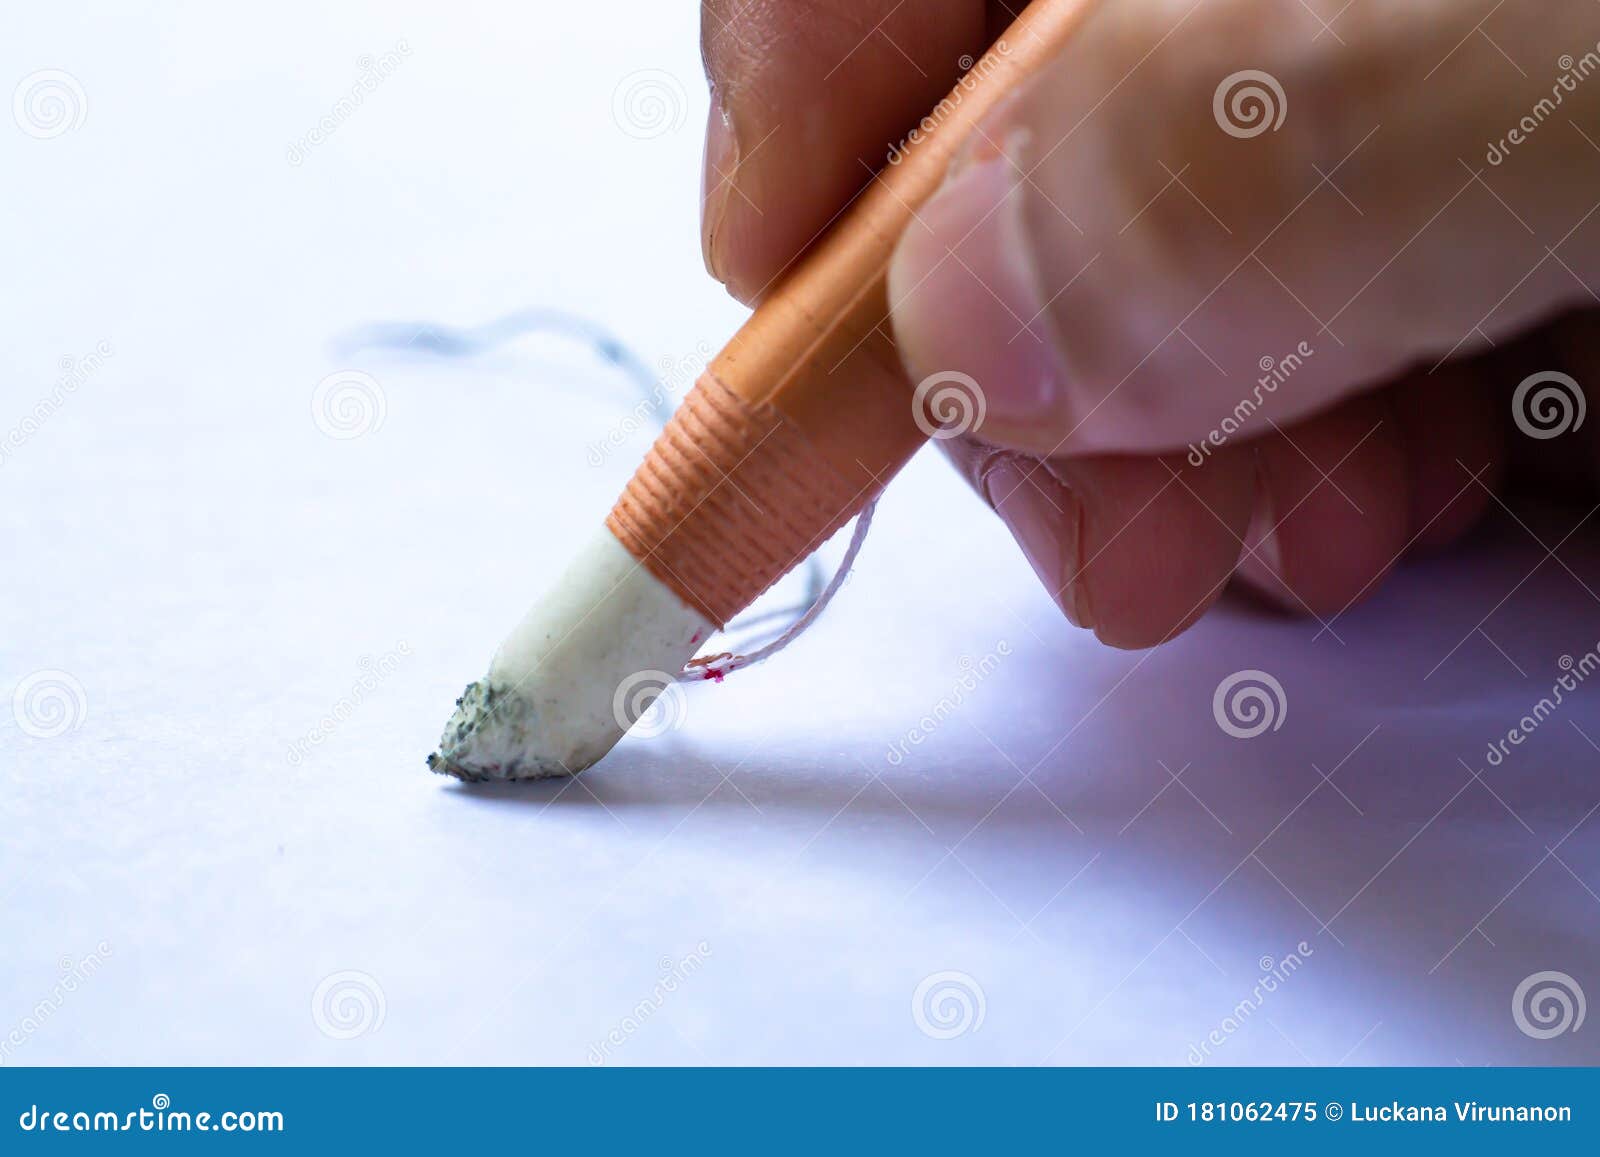 173 Grease Pencil Stock Photos - Free & Royalty-Free Stock Photos from  Dreamstime